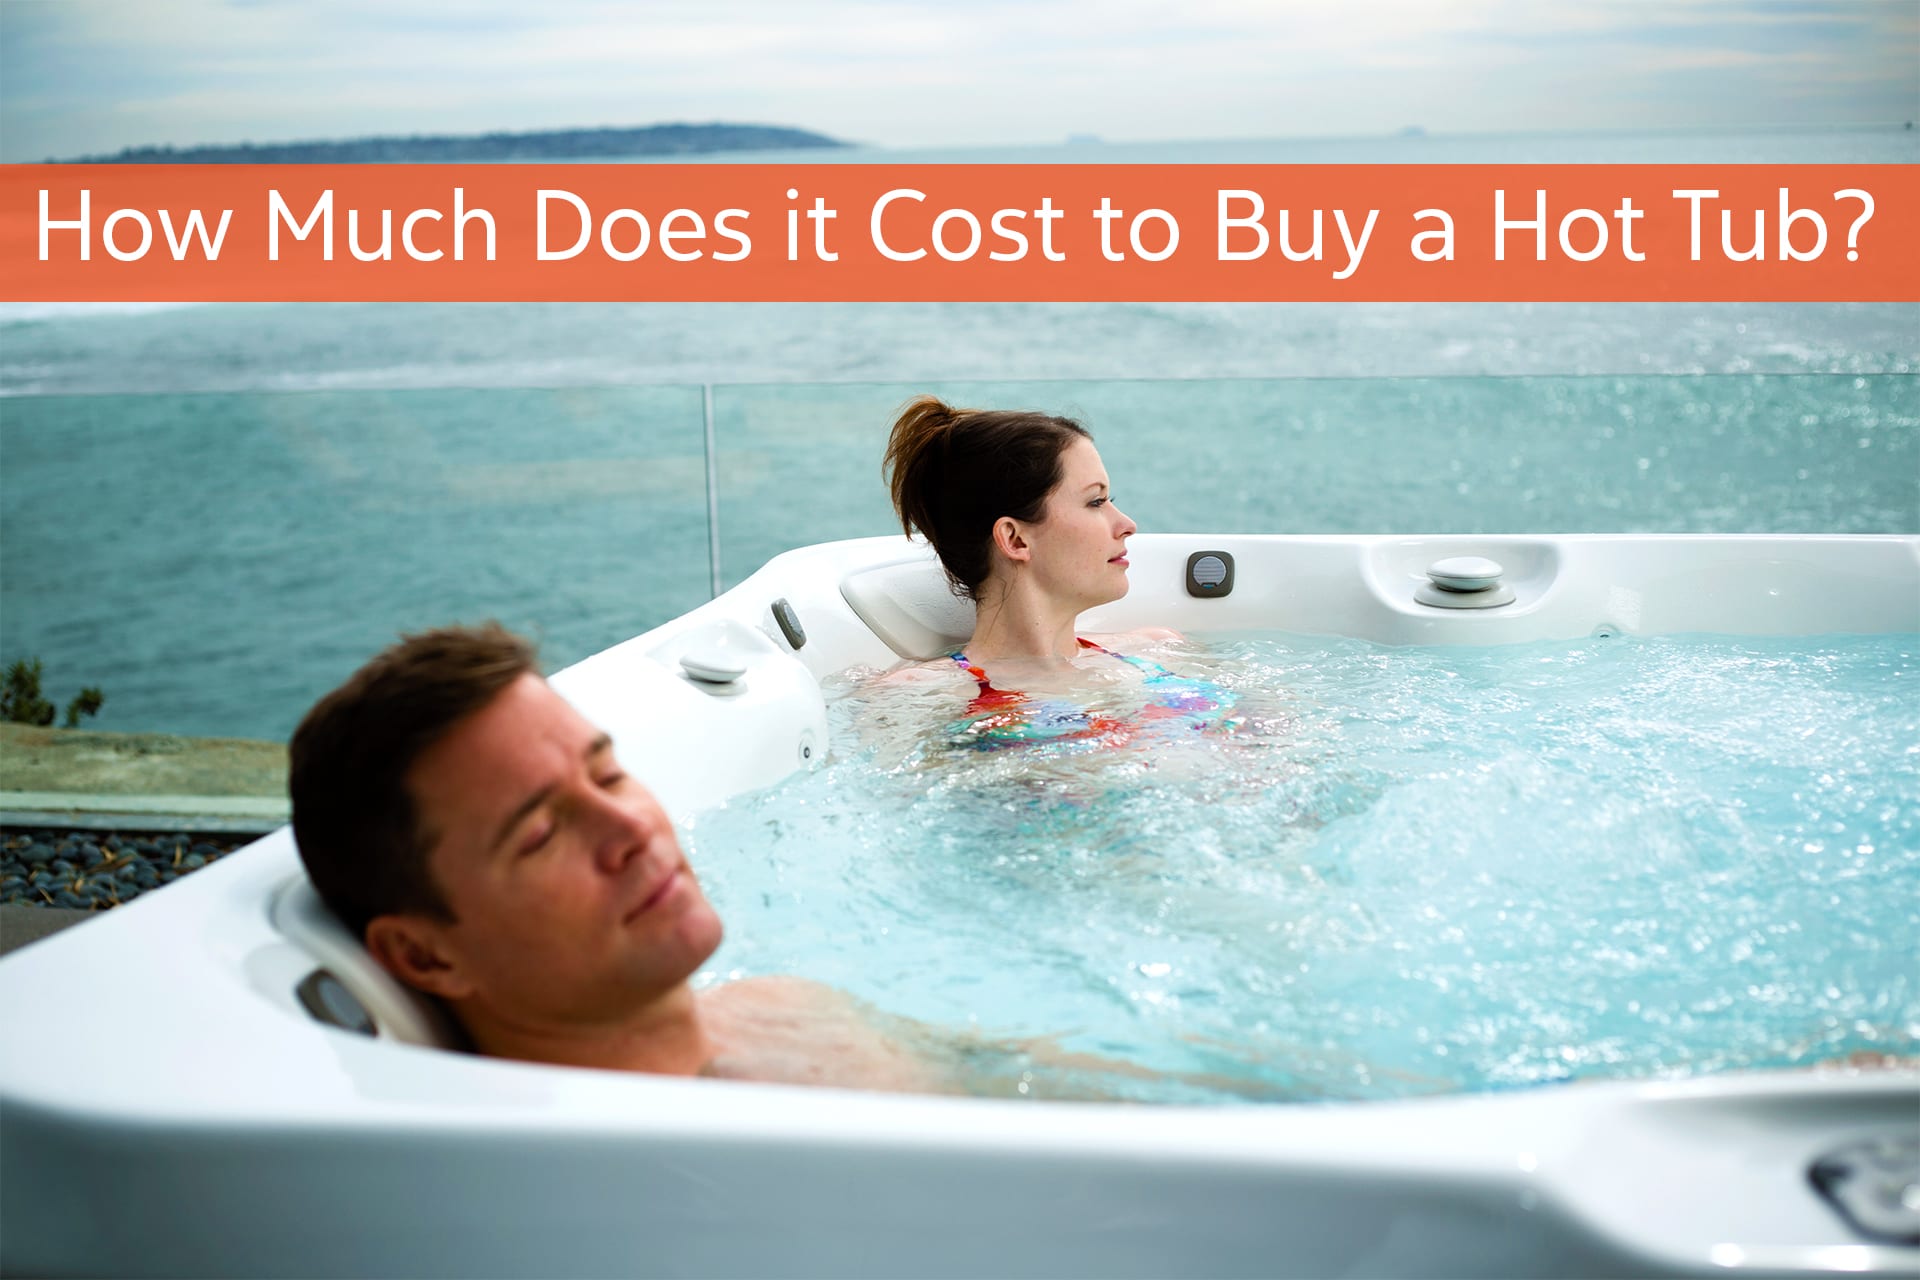 How much does it cost to buy a hot tub?